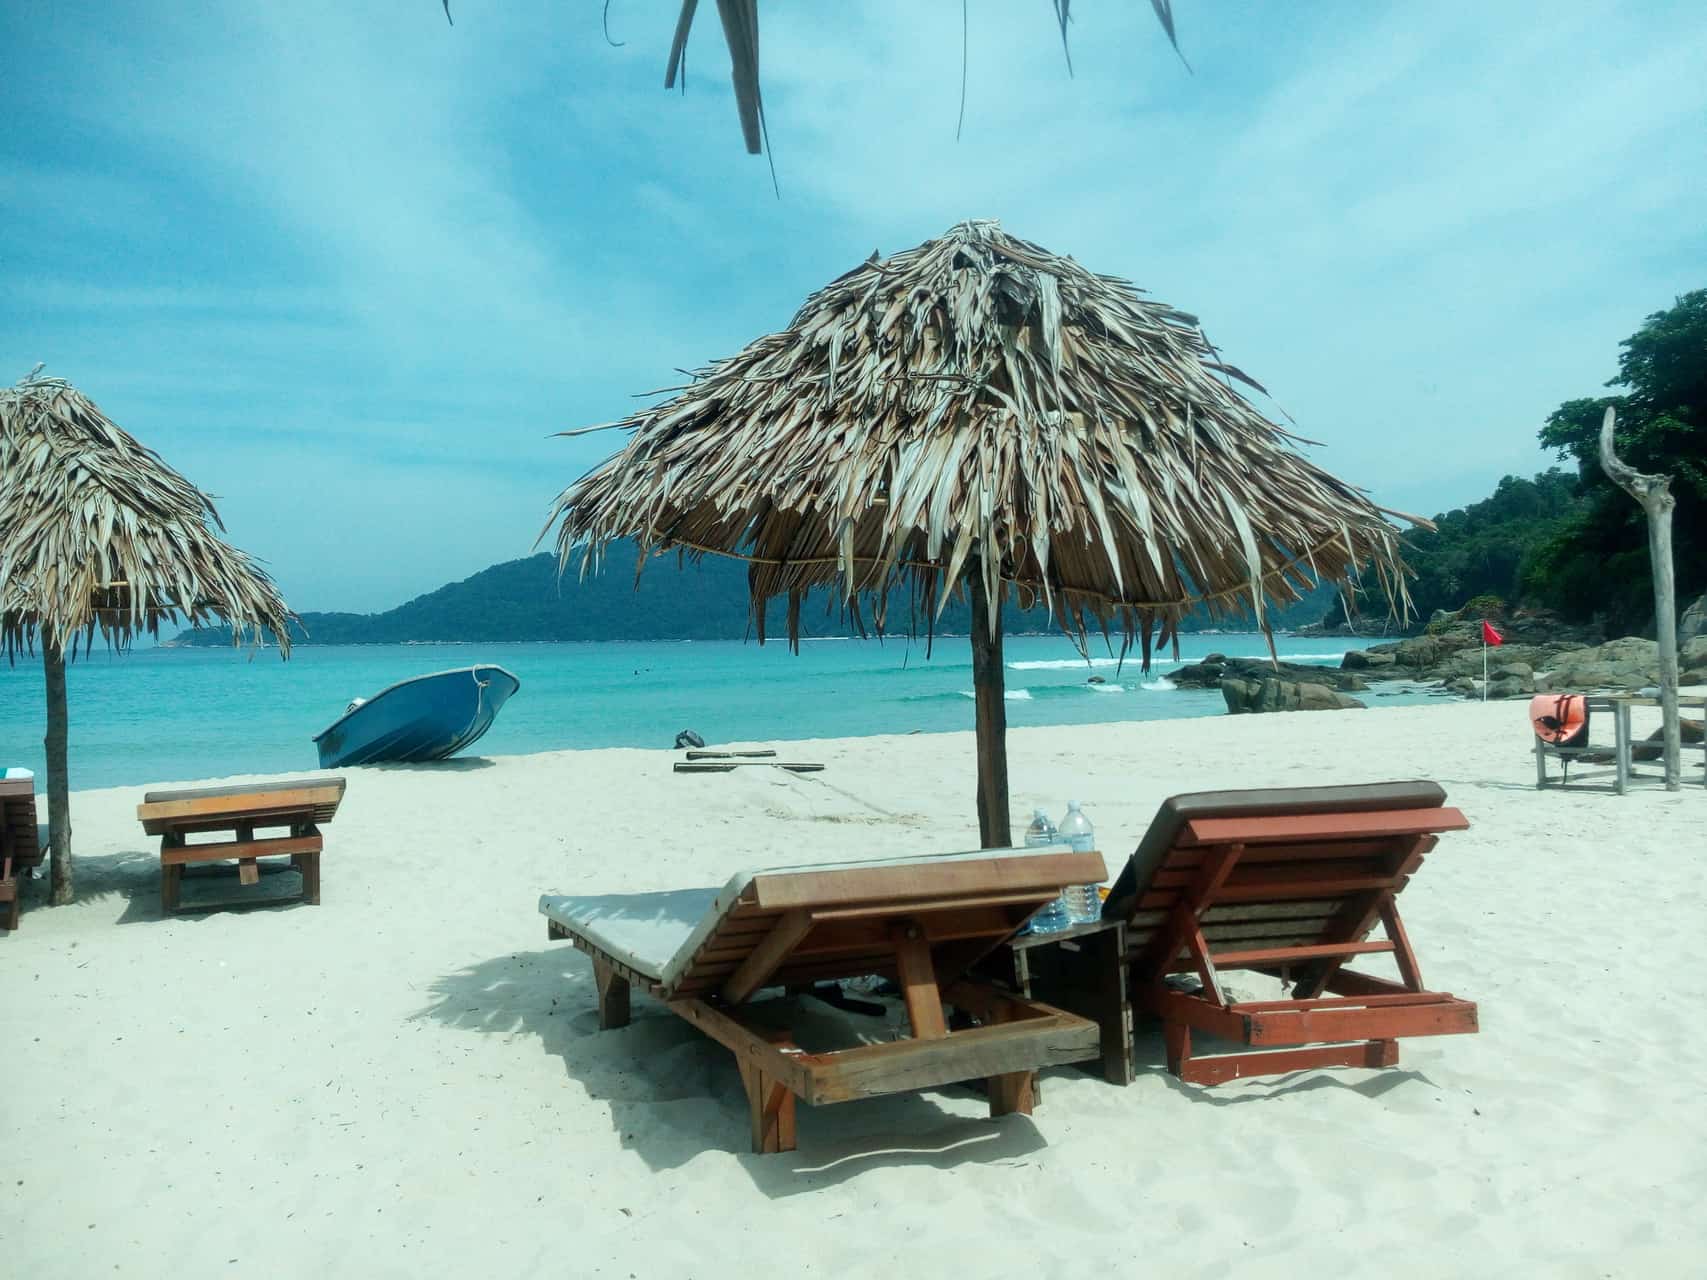 Where to stay in the Perhentian Islands.